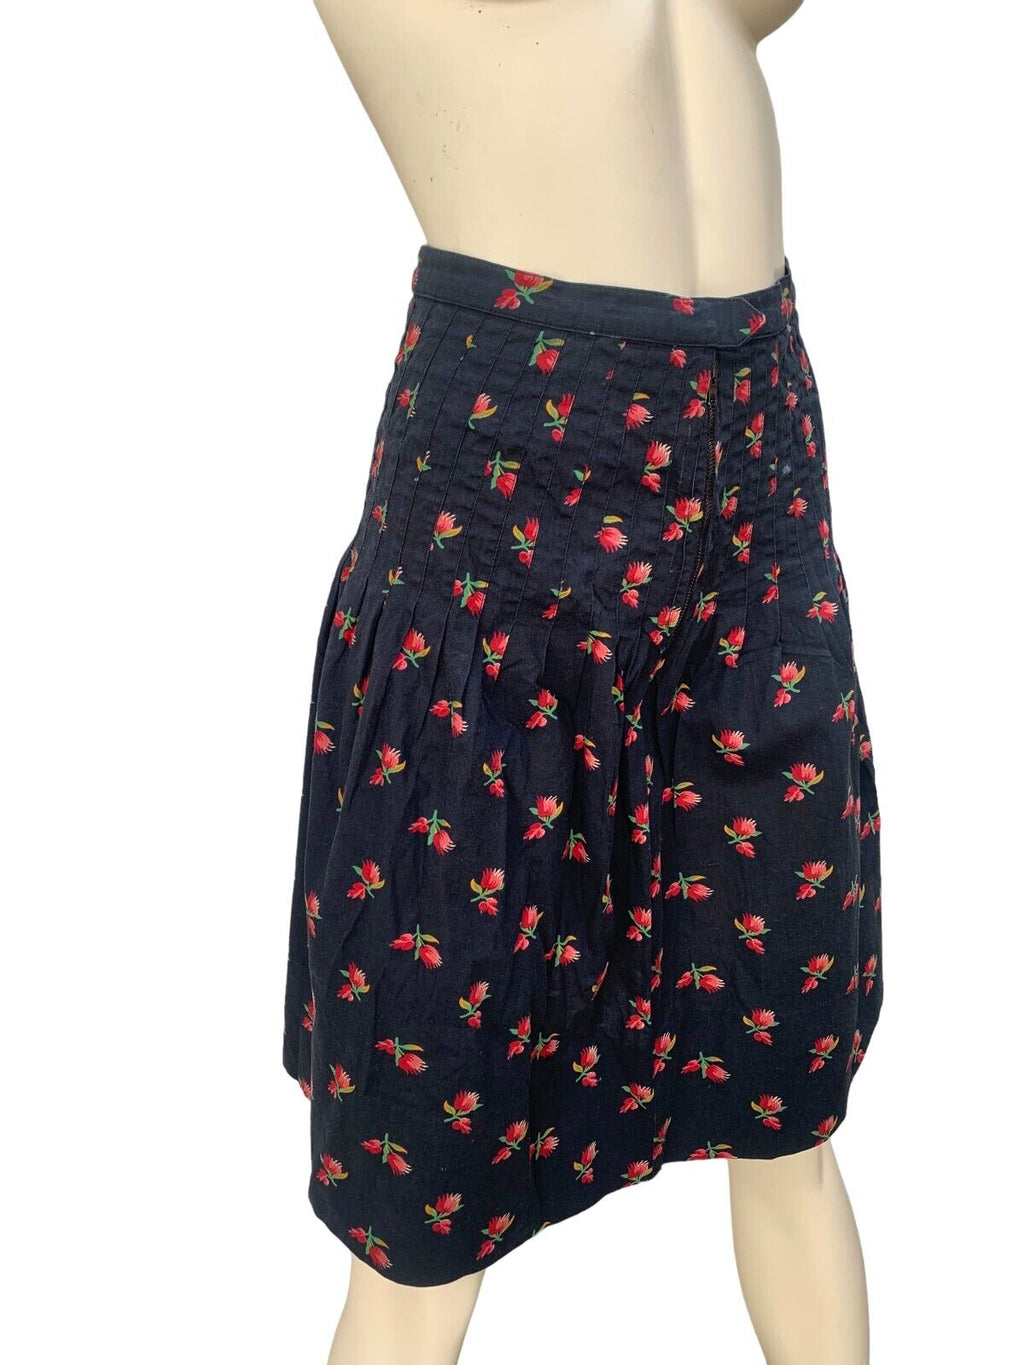 Rive Gauche  1970s Black - Red Floral Skirt